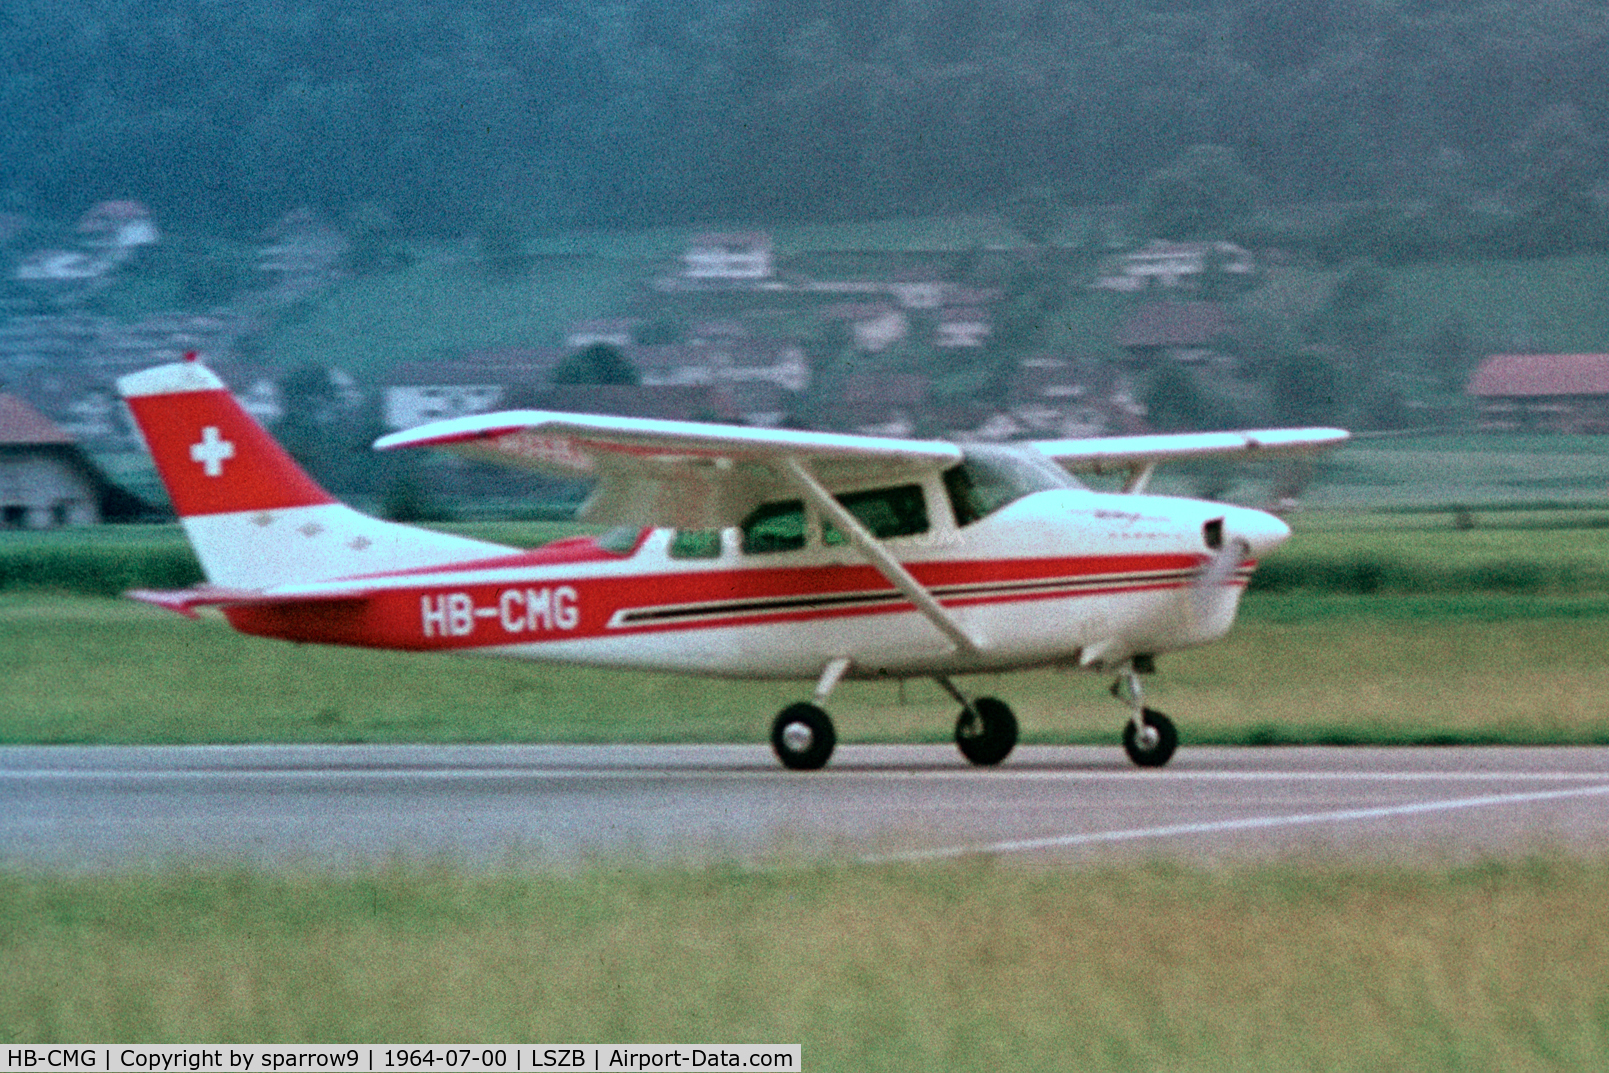 HB-CMG, 1963 Cessna 210C C/N 21058150, Taking-off rwy 32 Berne. Scanned from a slide.